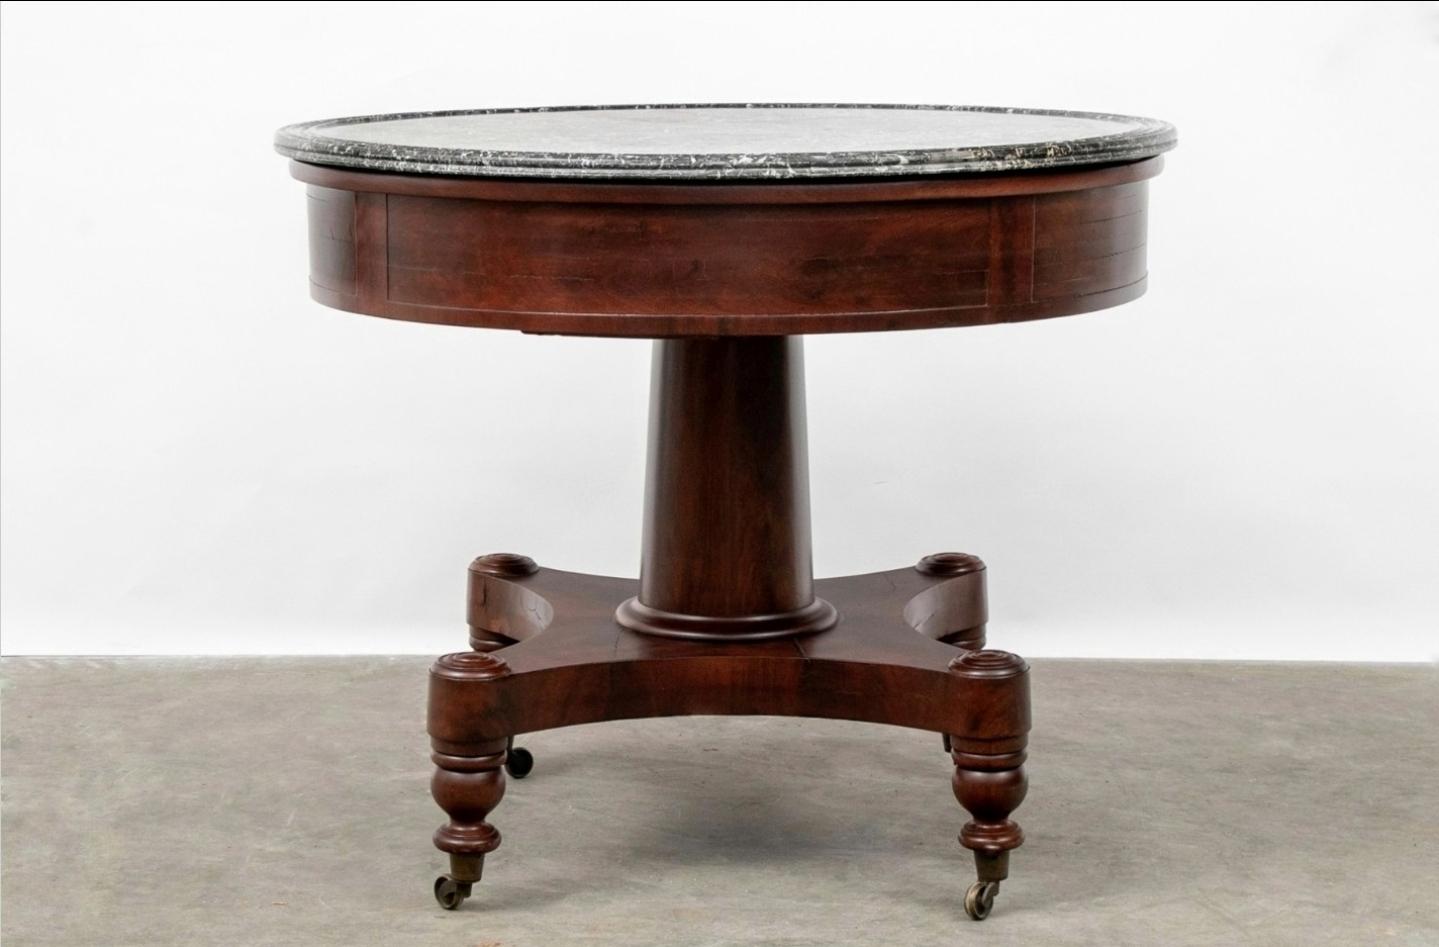 American Classical Antique American Boston Classical Mahogany Pedestal Center Table  For Sale